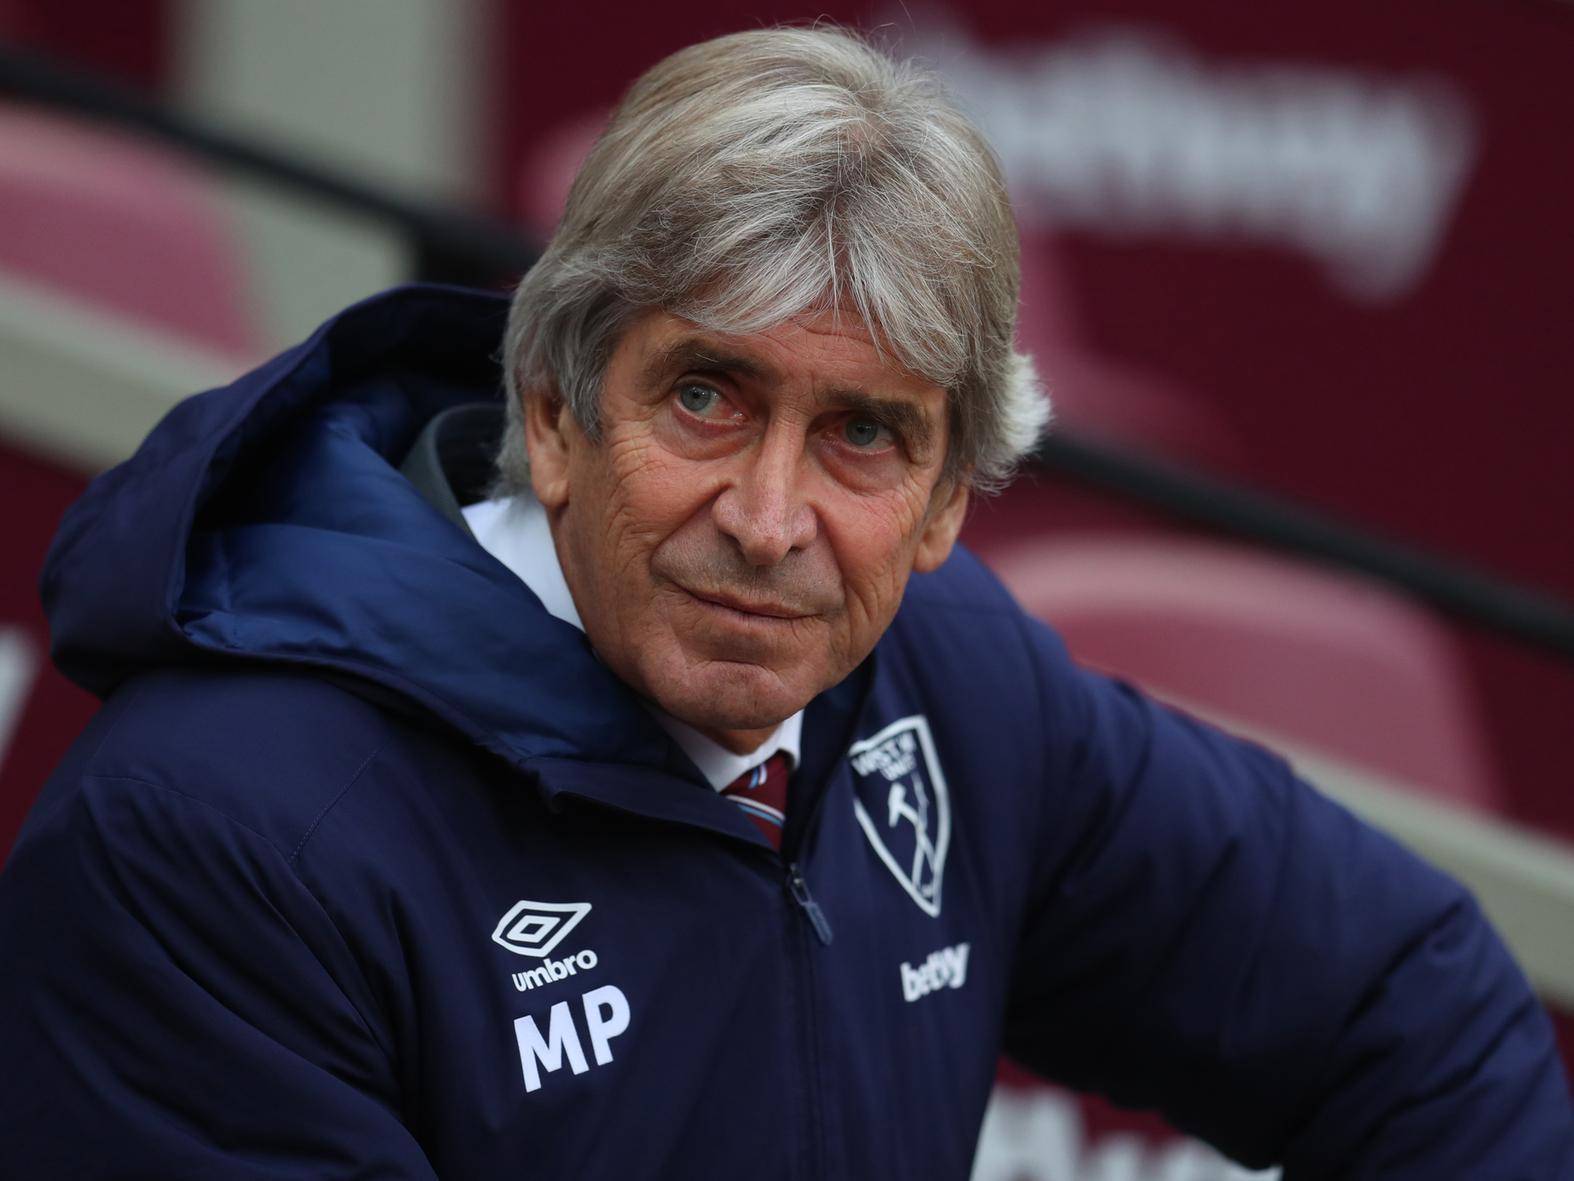 West Ham vice-chair Karren Brady has given her backing to Hammers boss Manuel Pellegrini. (The Sun)